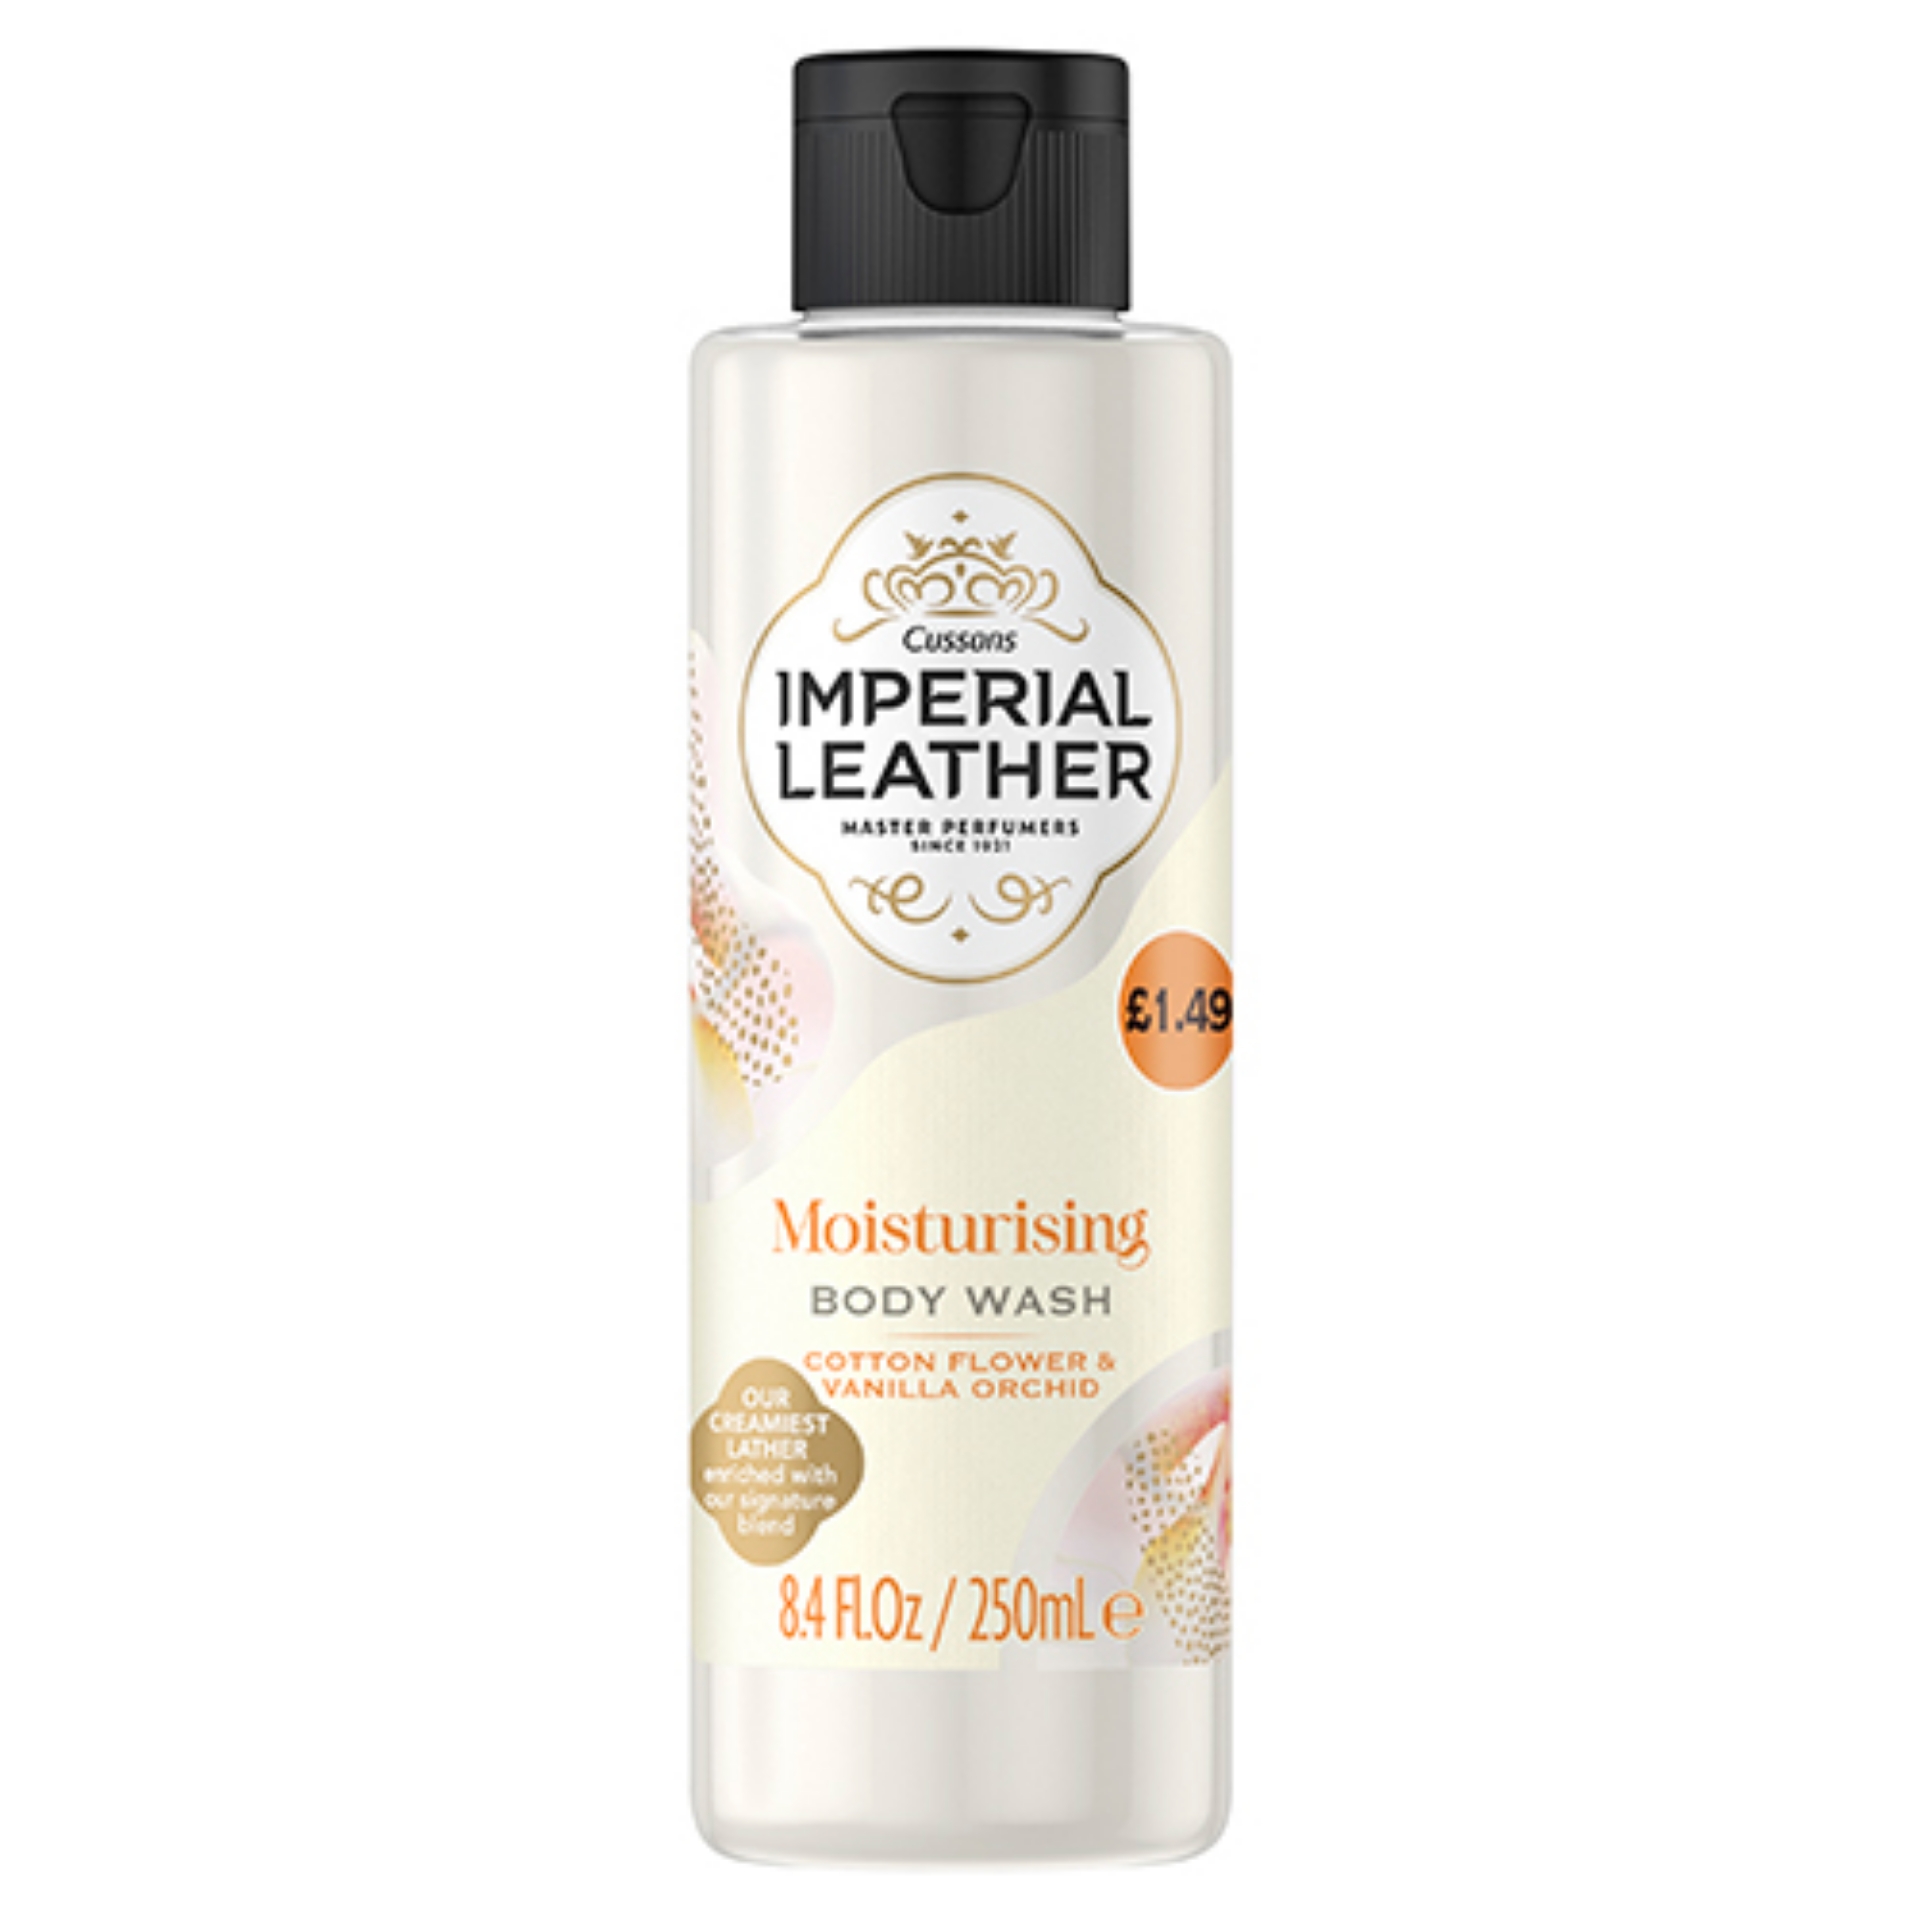 Picture of IMPERIAL LEATHER BODYWASH - MOISTURISING pm1.49